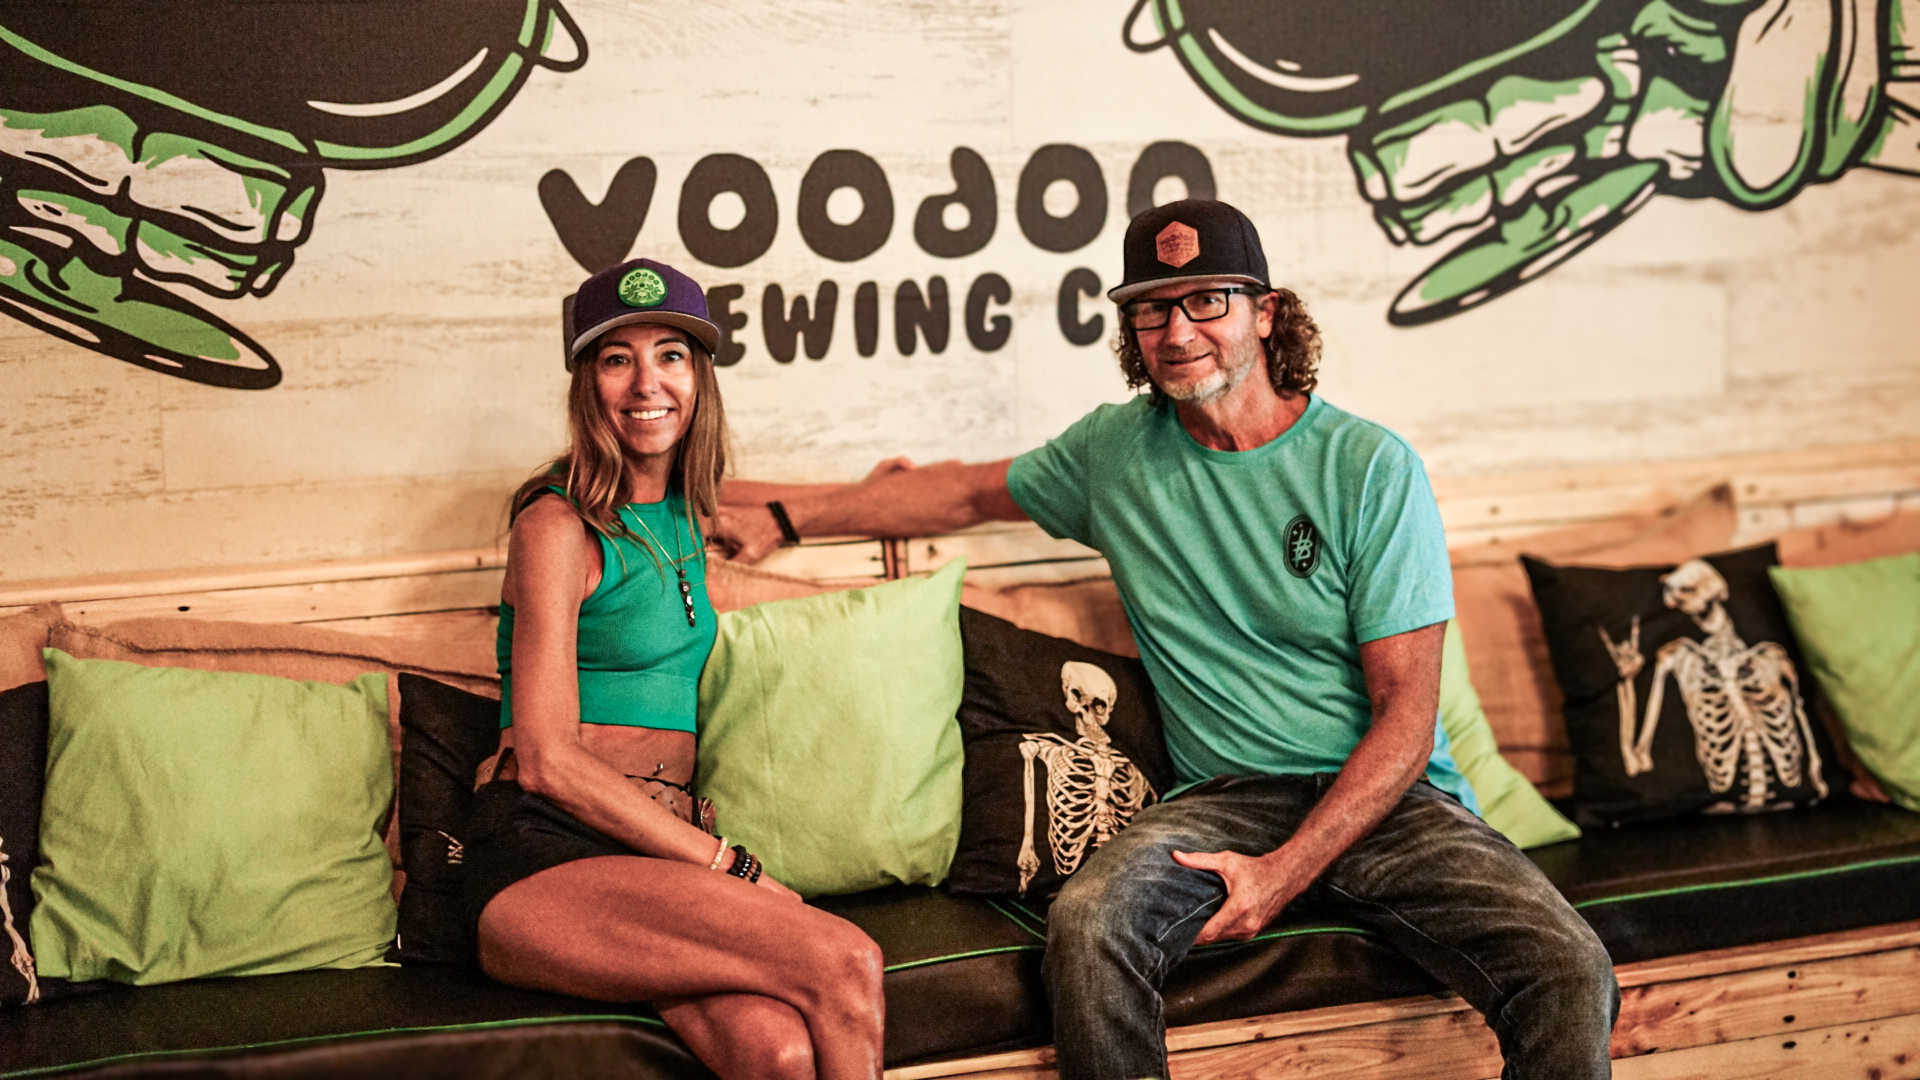 Voodoo Brewing Co. disrupts traditional brewery business model